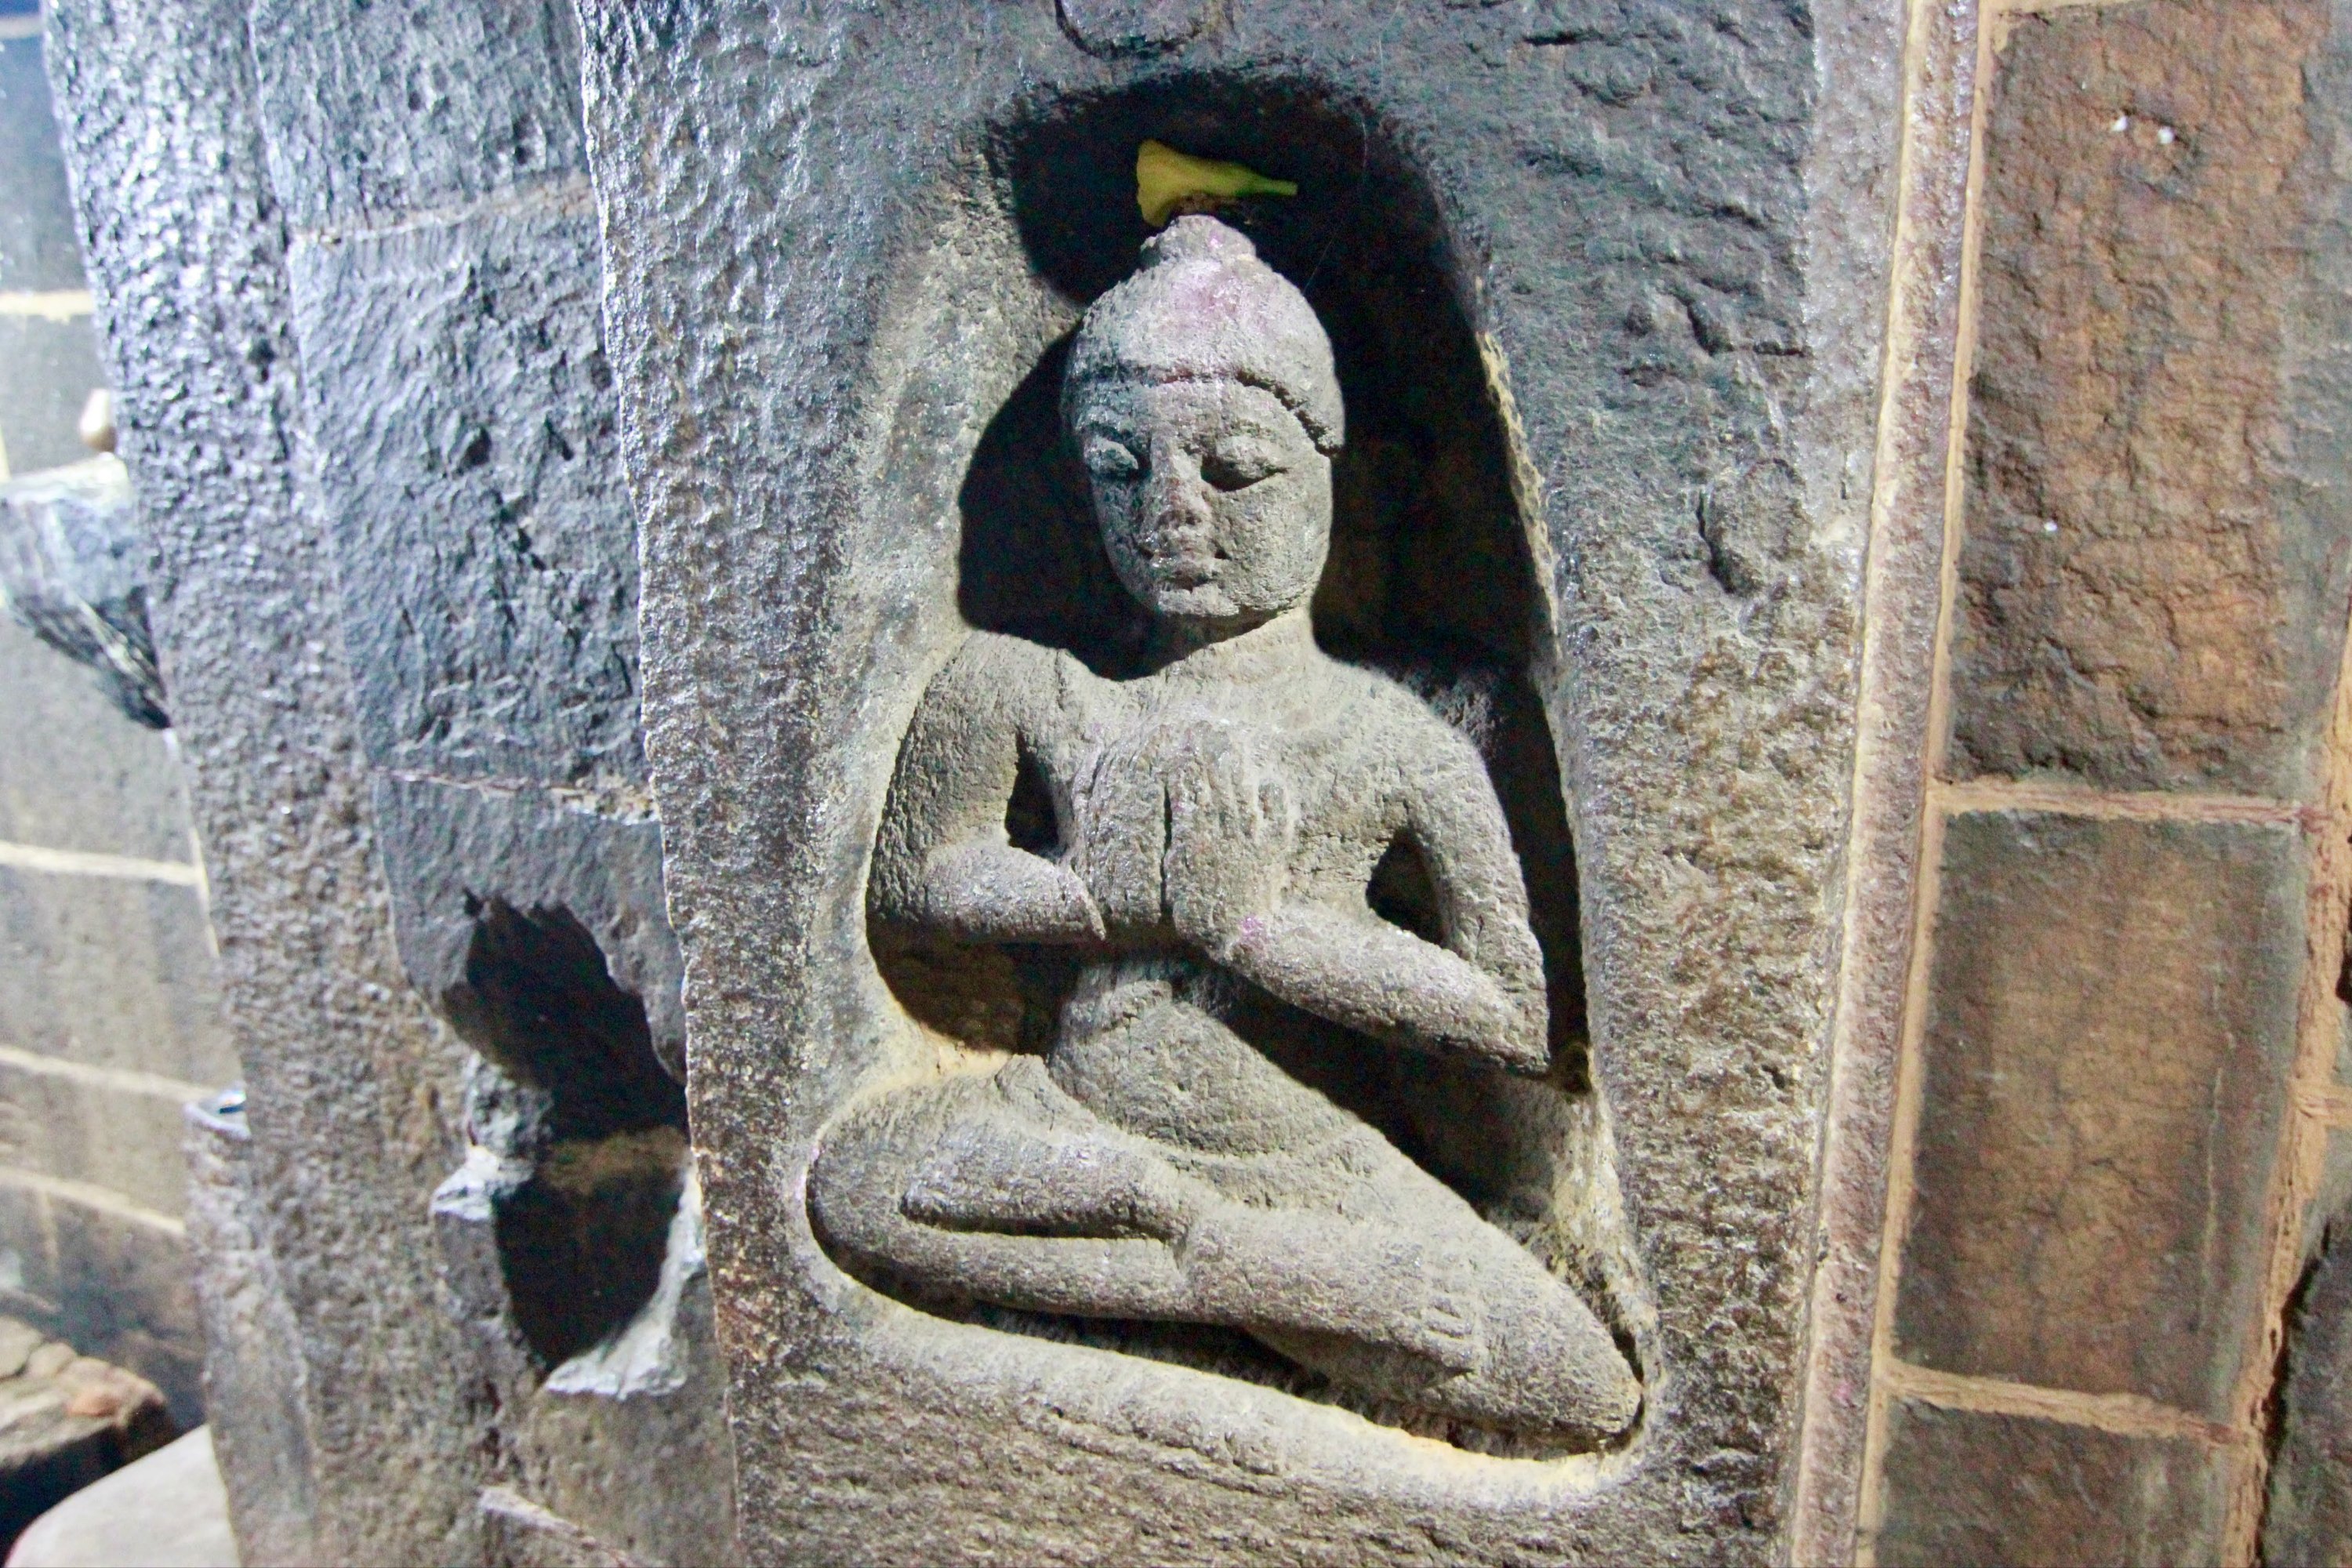 The Buddhist connection at the site. 